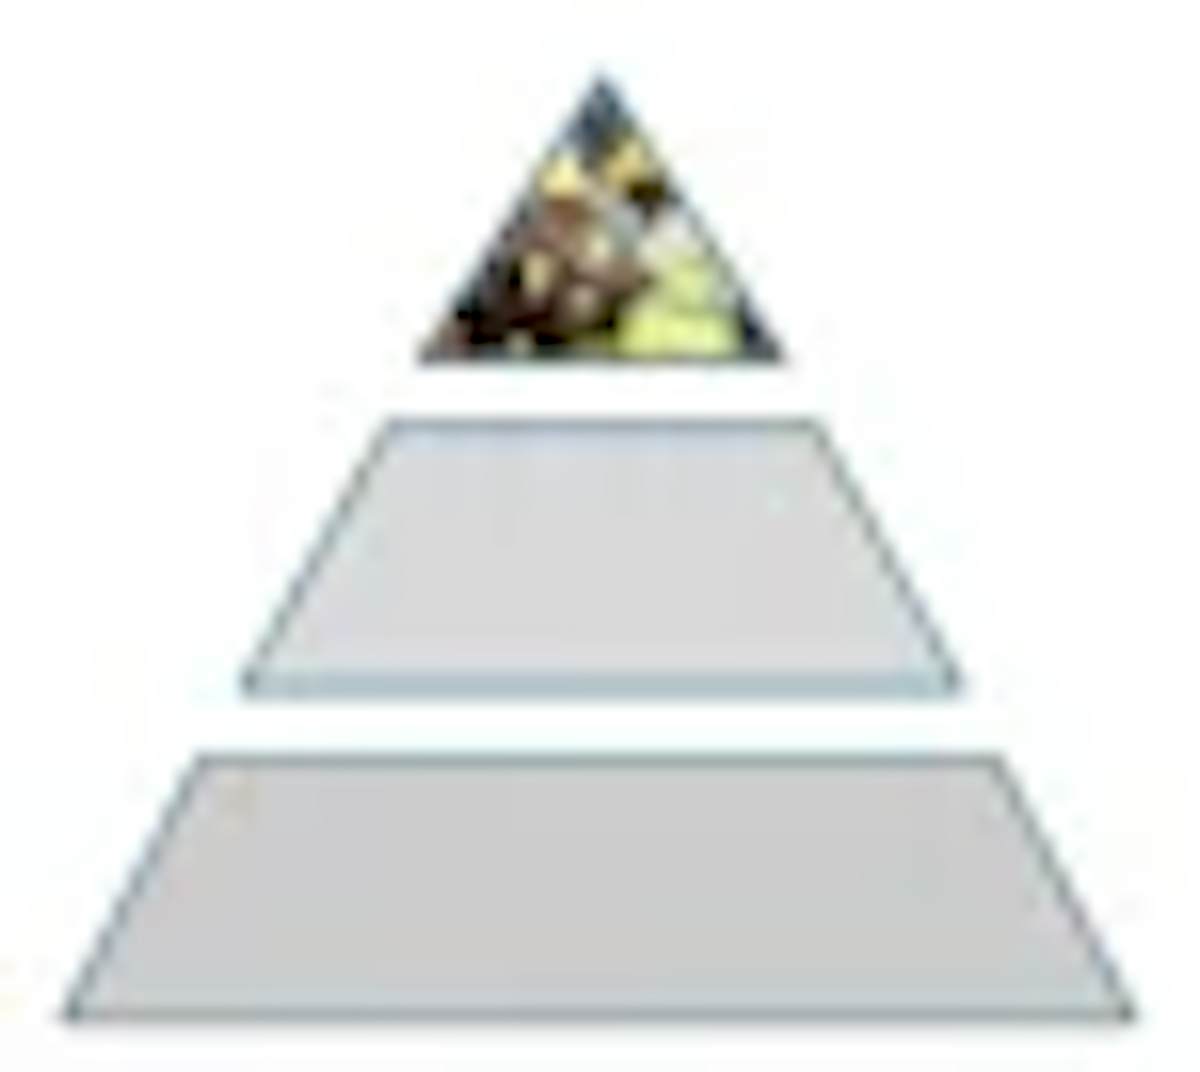 Pyramid where the top has factory workers